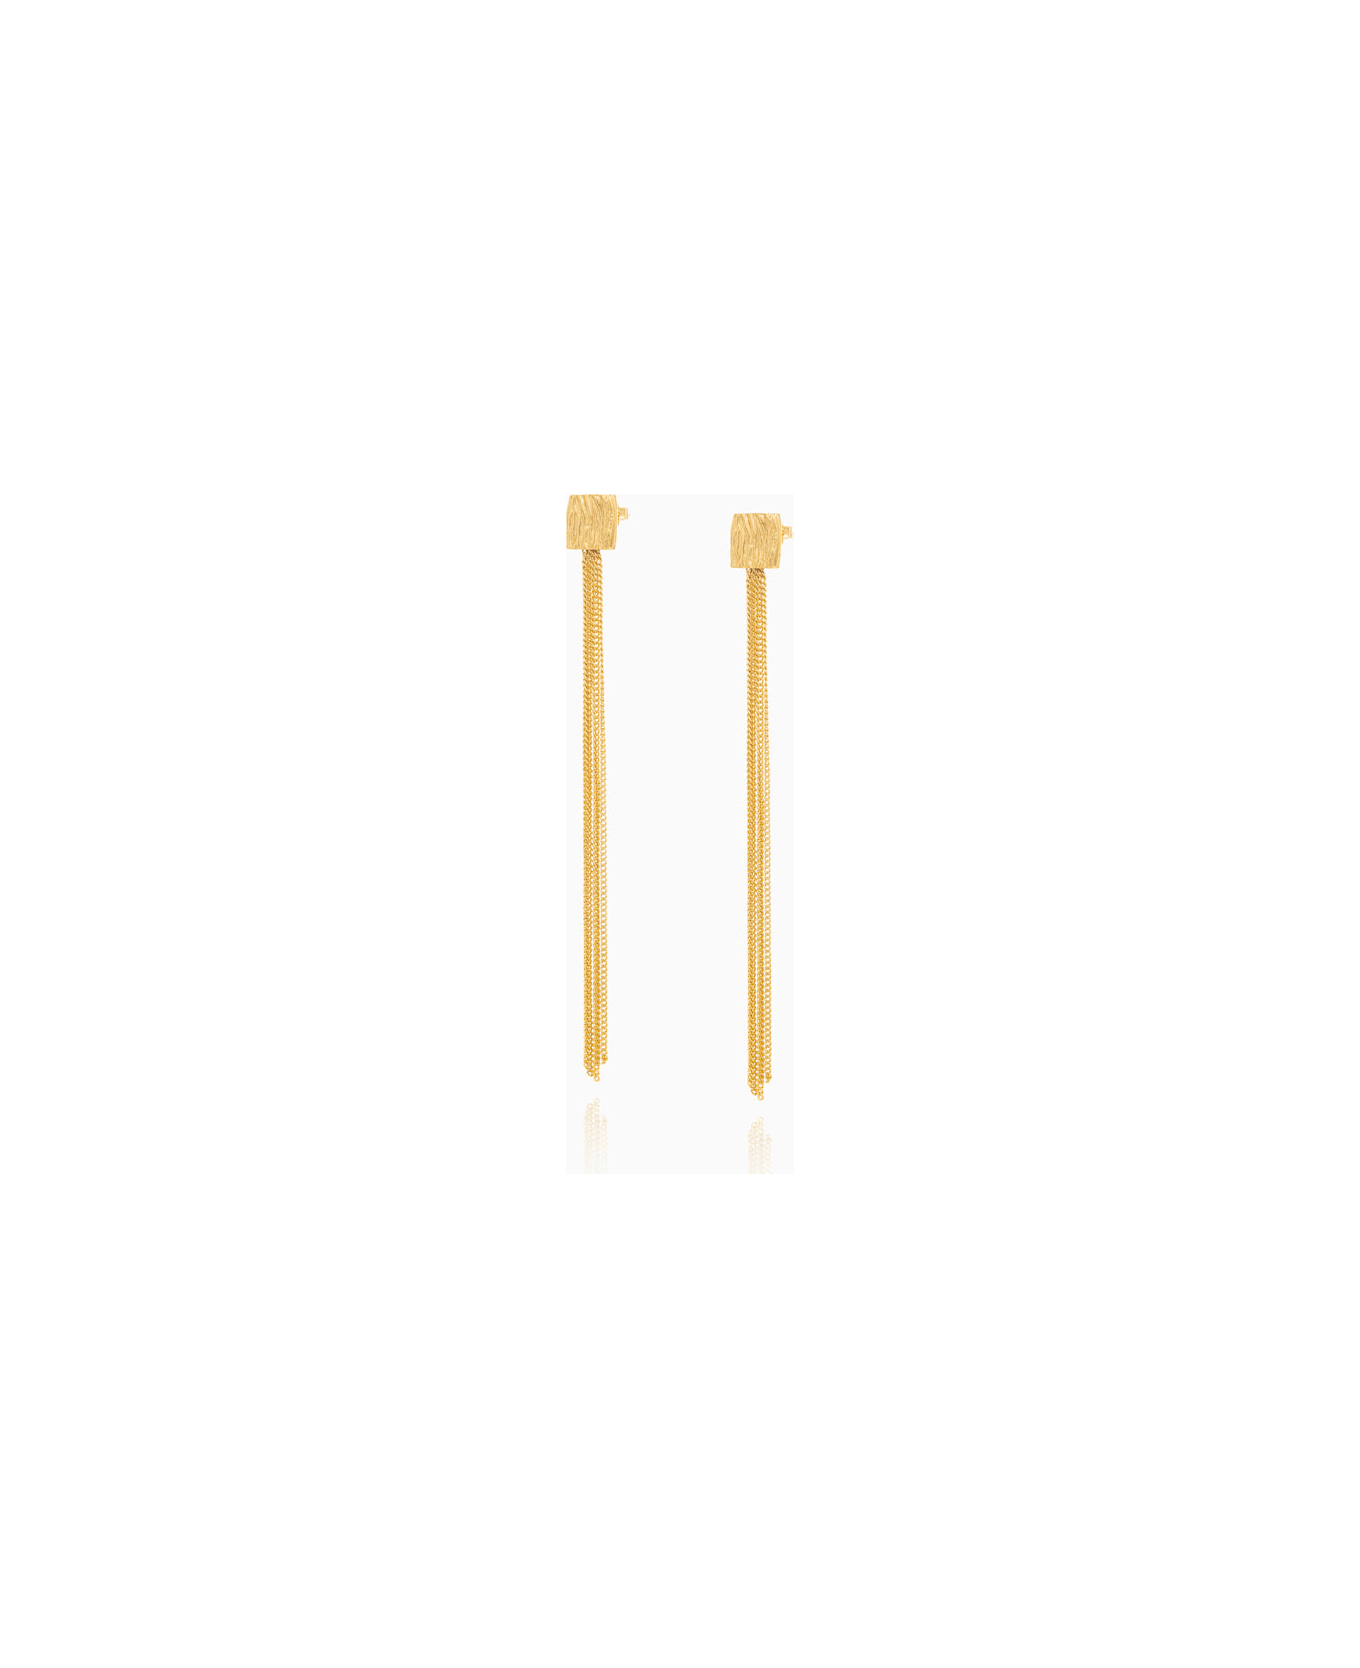 Federica Tosi Earring Long Daisy Gold - Gold イヤリング